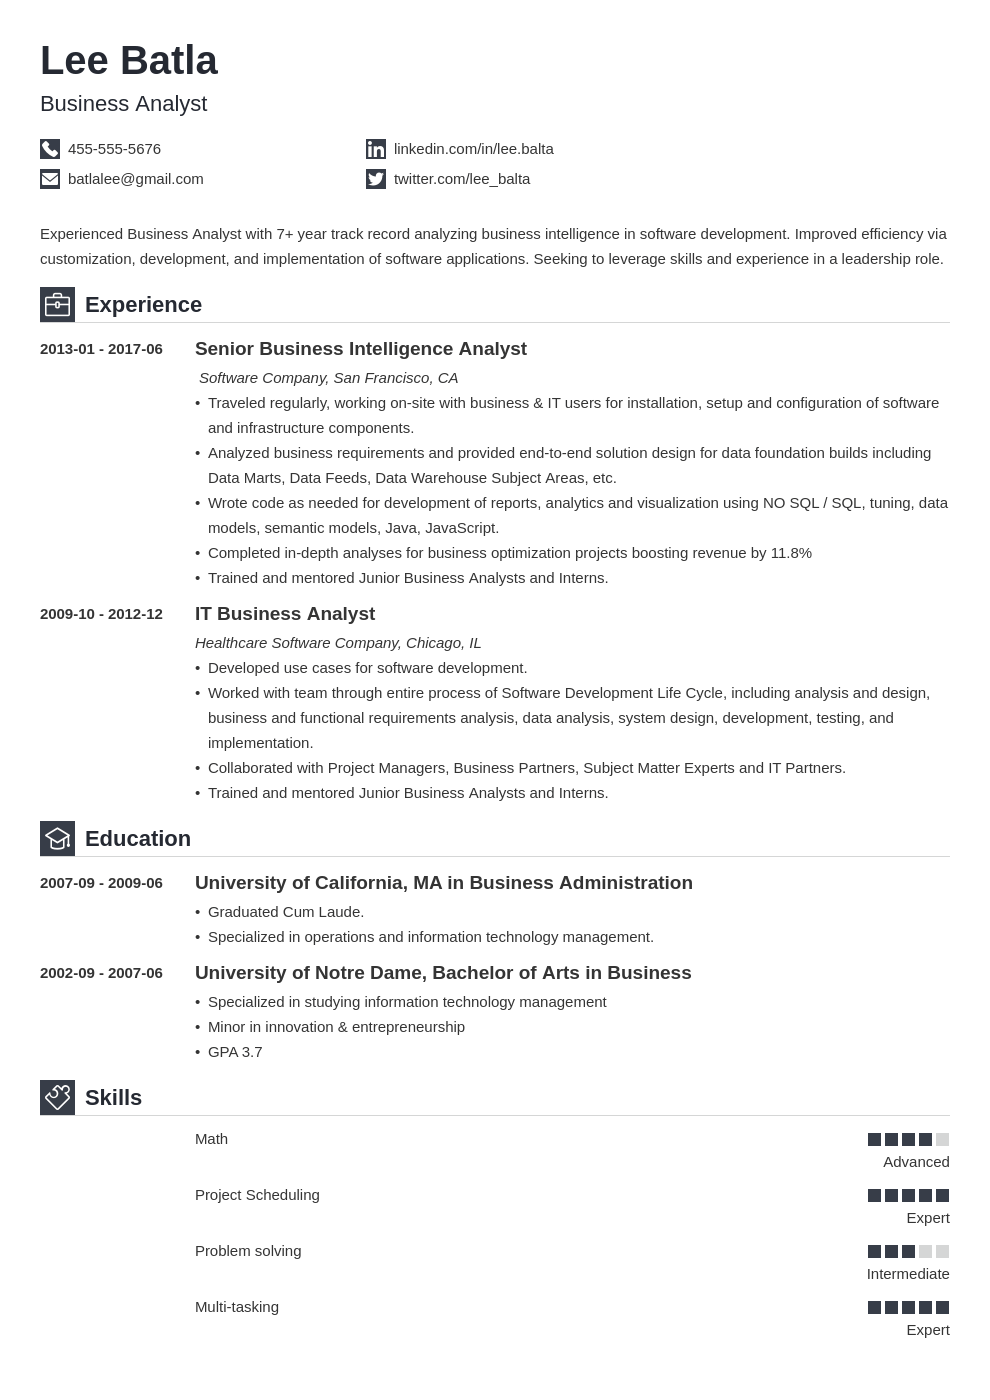 Business Analyst Cv Template from cdn-images.zety.com